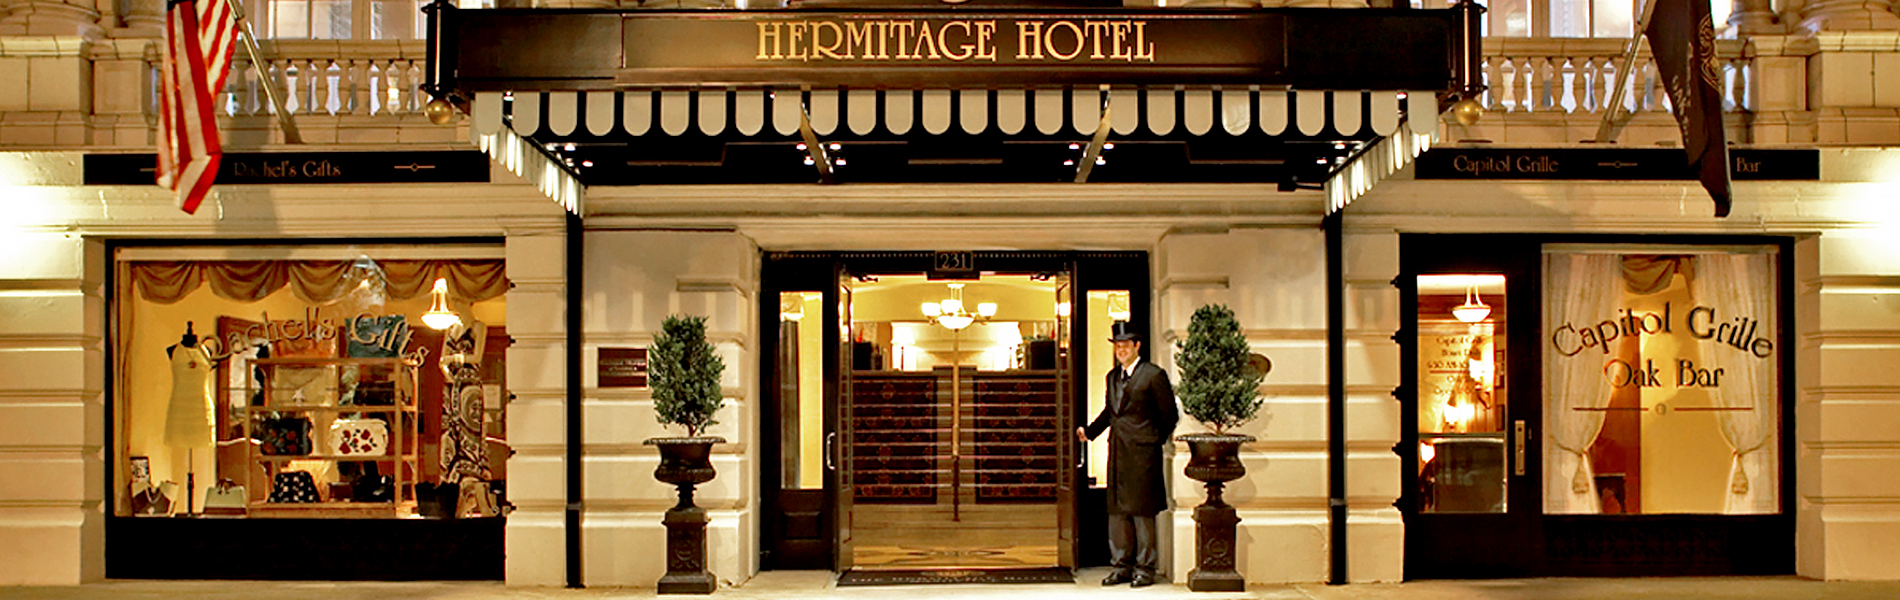 The Hermitage Hotel Entrance